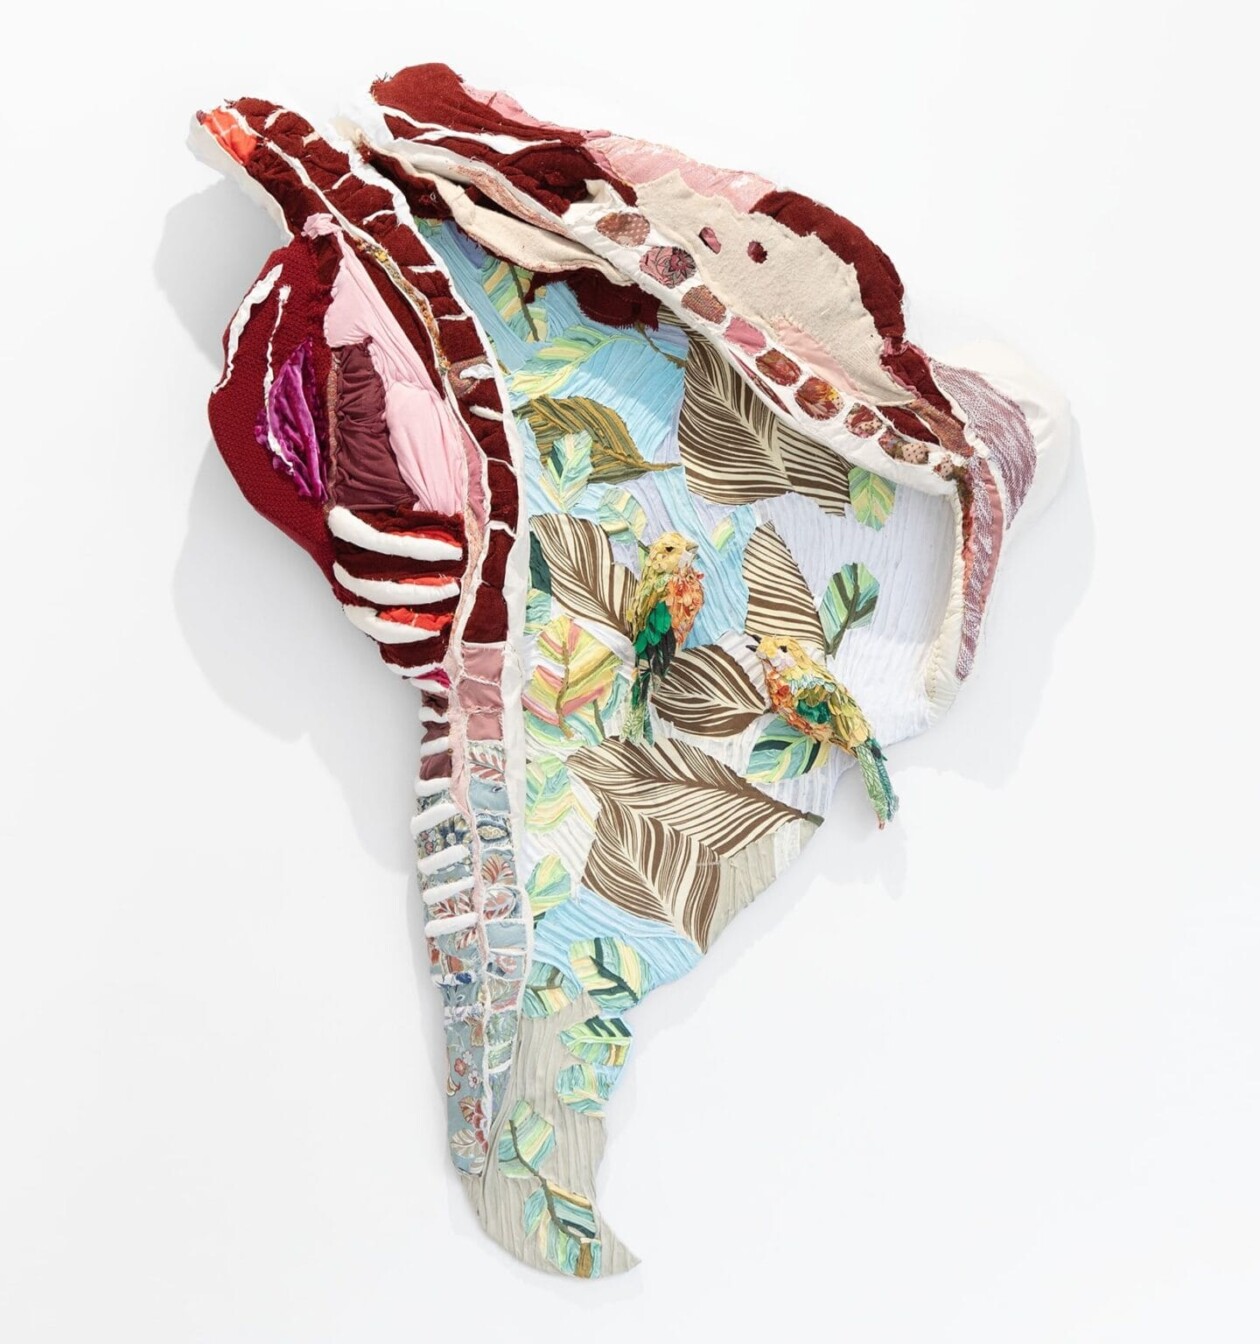 Thought Provoking Textile Sculptures Made From Discarded Fabrics By Tamara Kostianovsky (7)